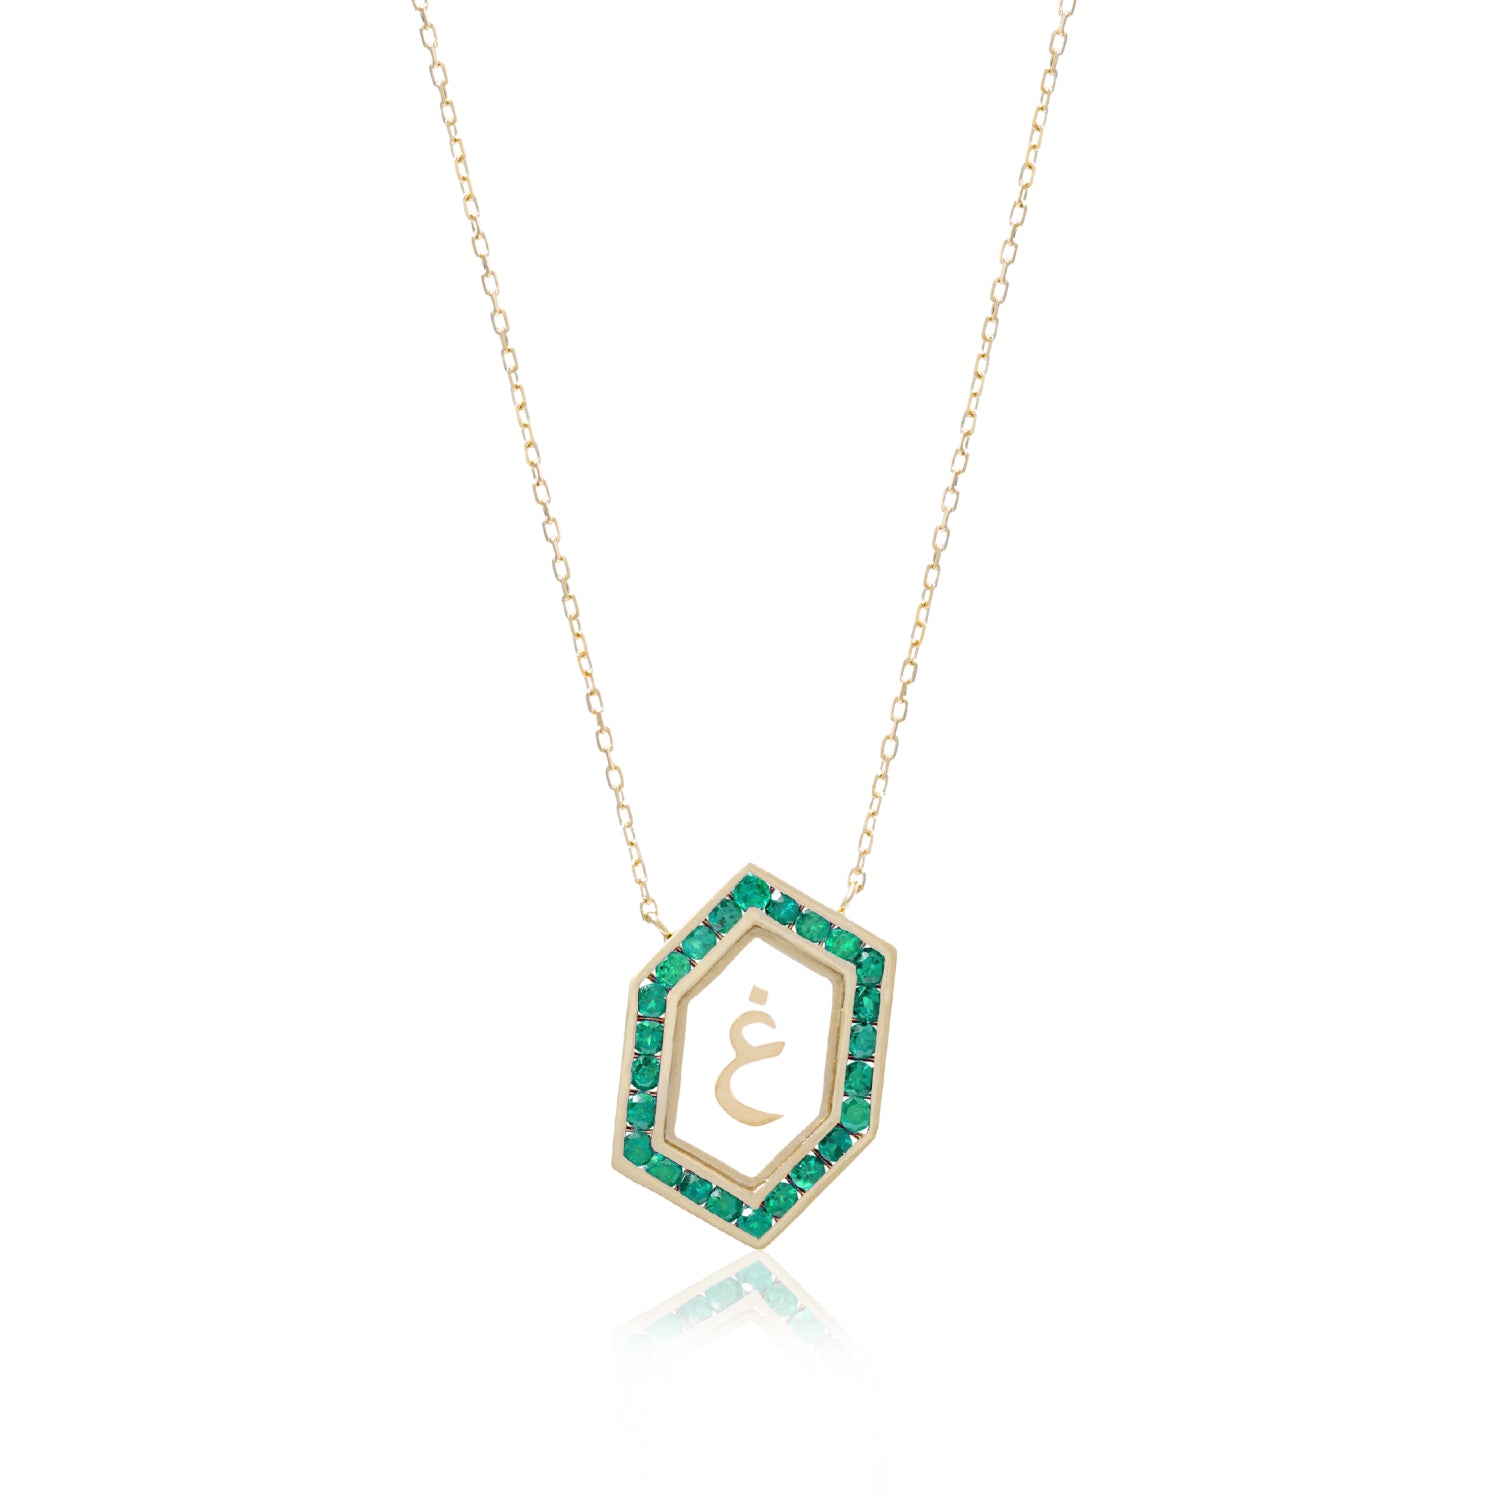 Qamoos 1.0 Letter غ Emerald Necklace in Yellow Gold